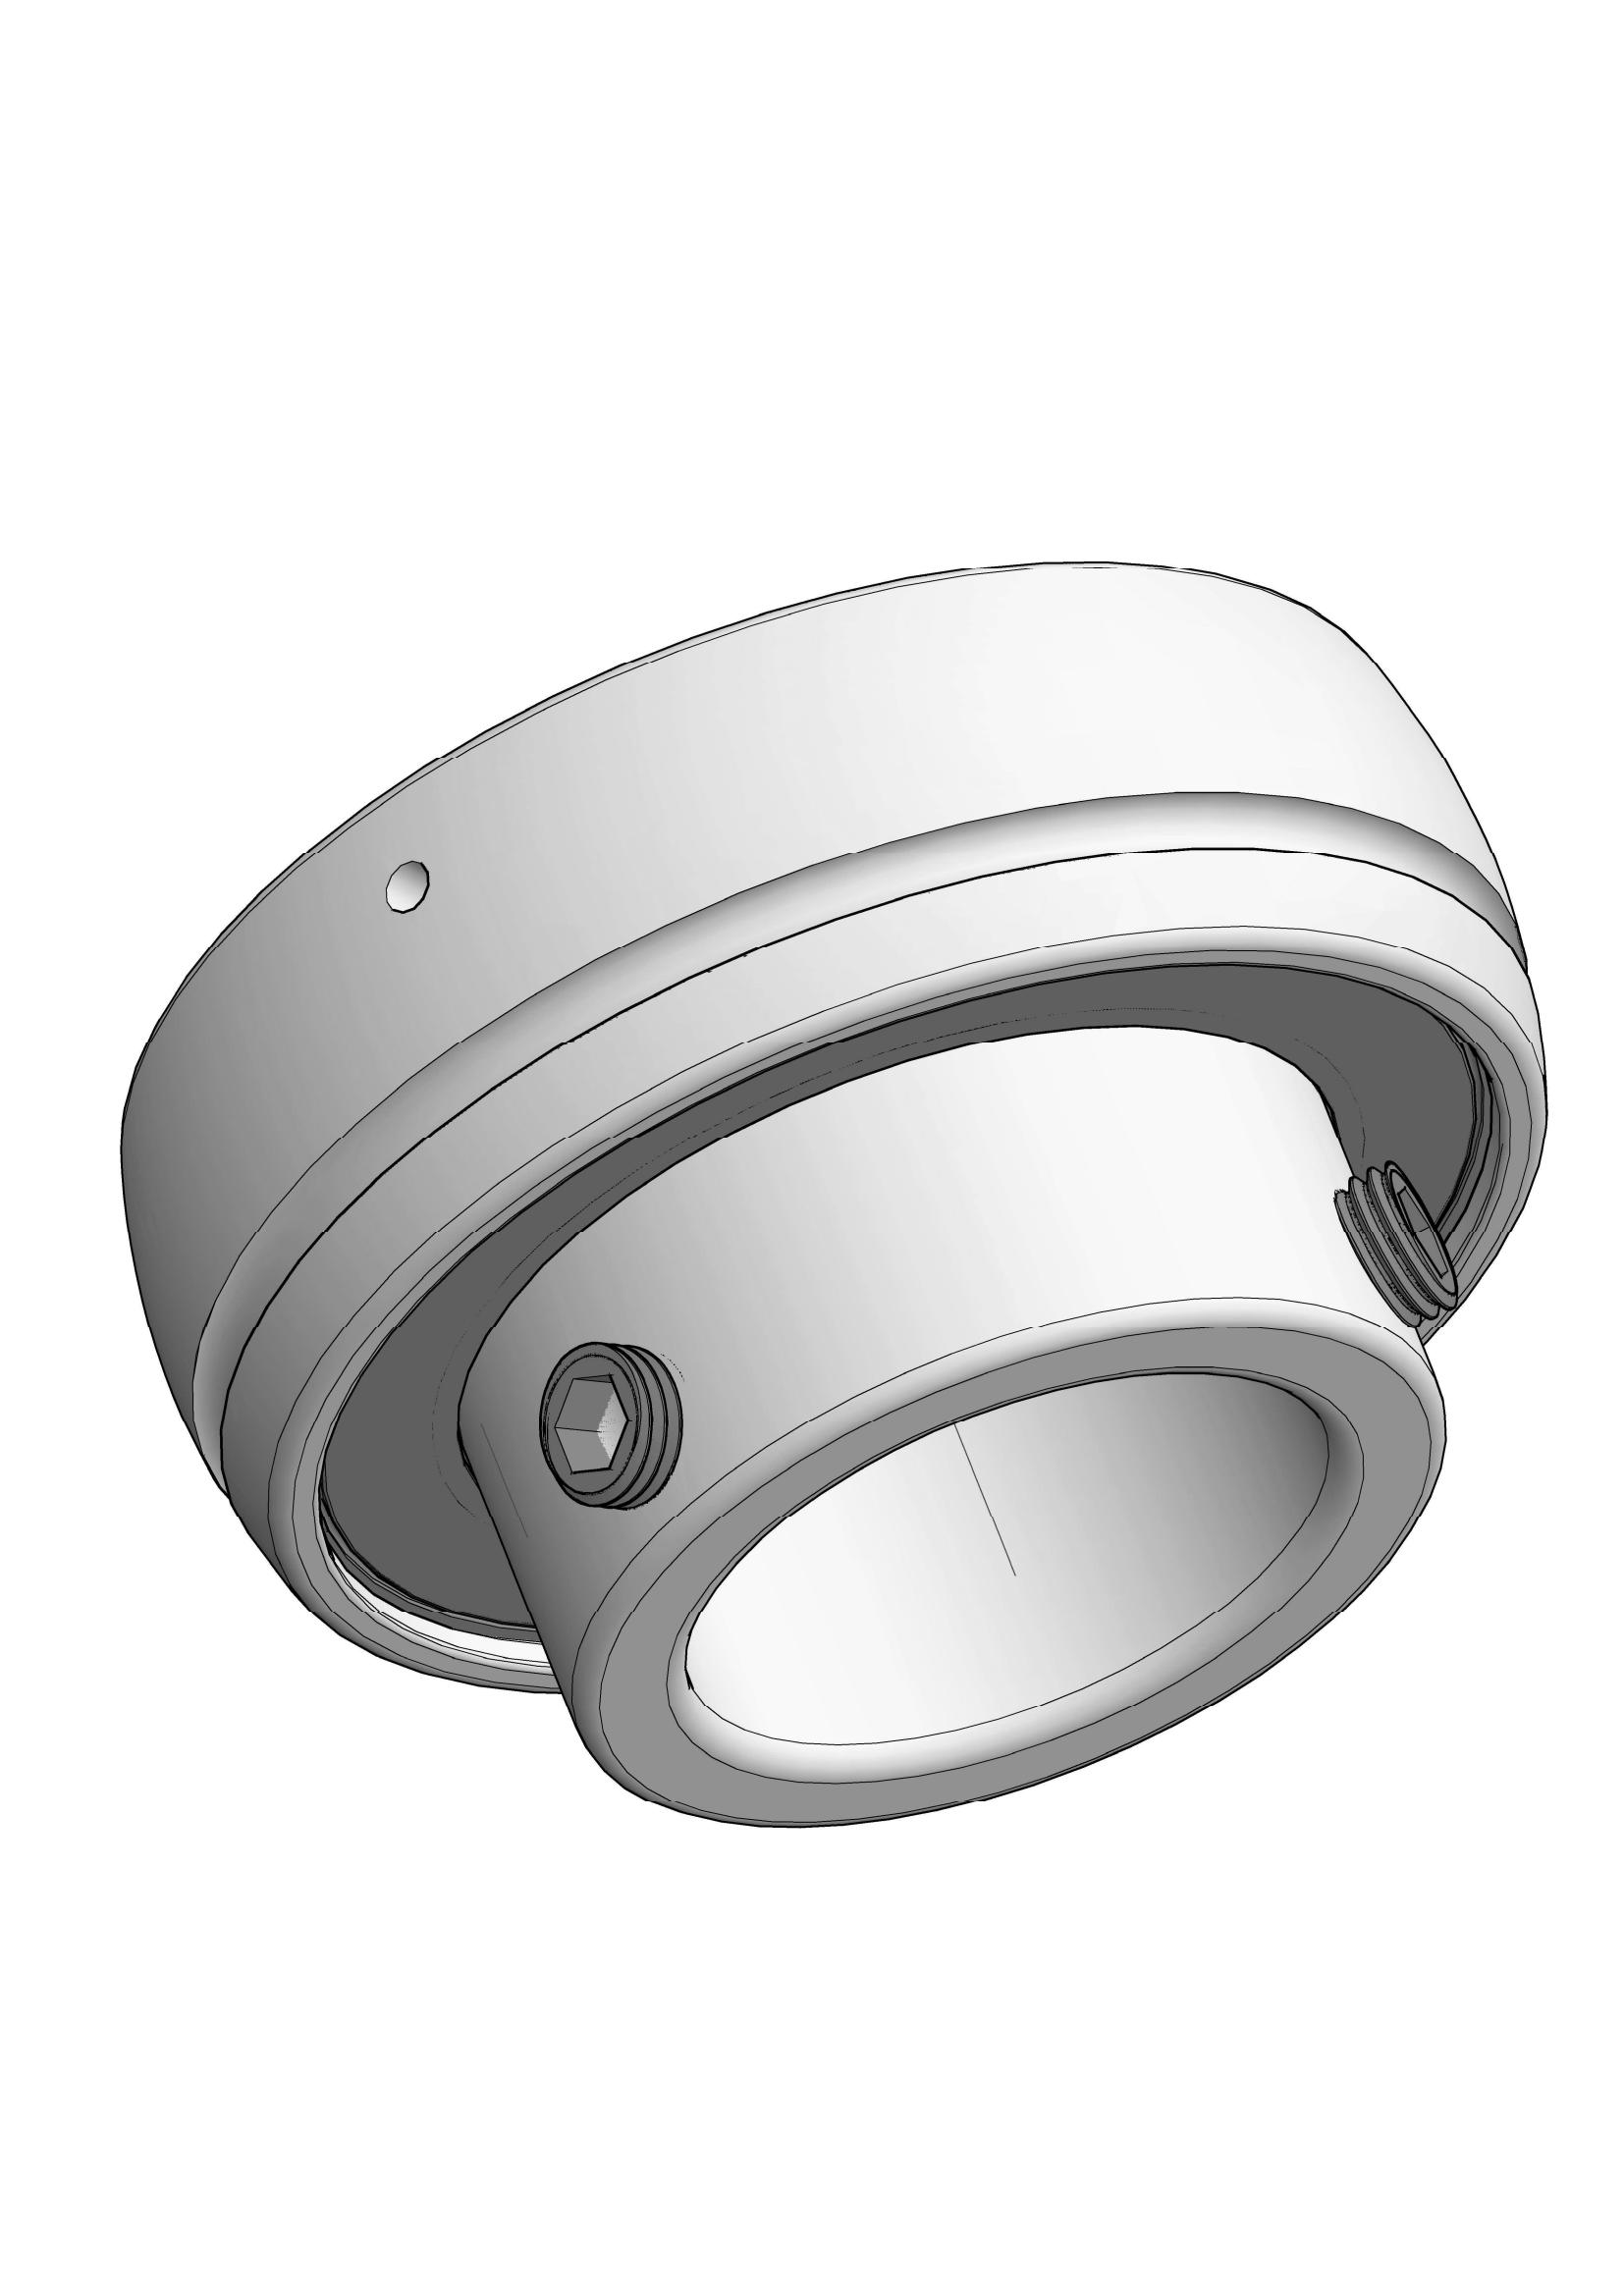 SB211-33 insert ball bearings with Eccentric Collar Lock with 2-1/16 inch Bore